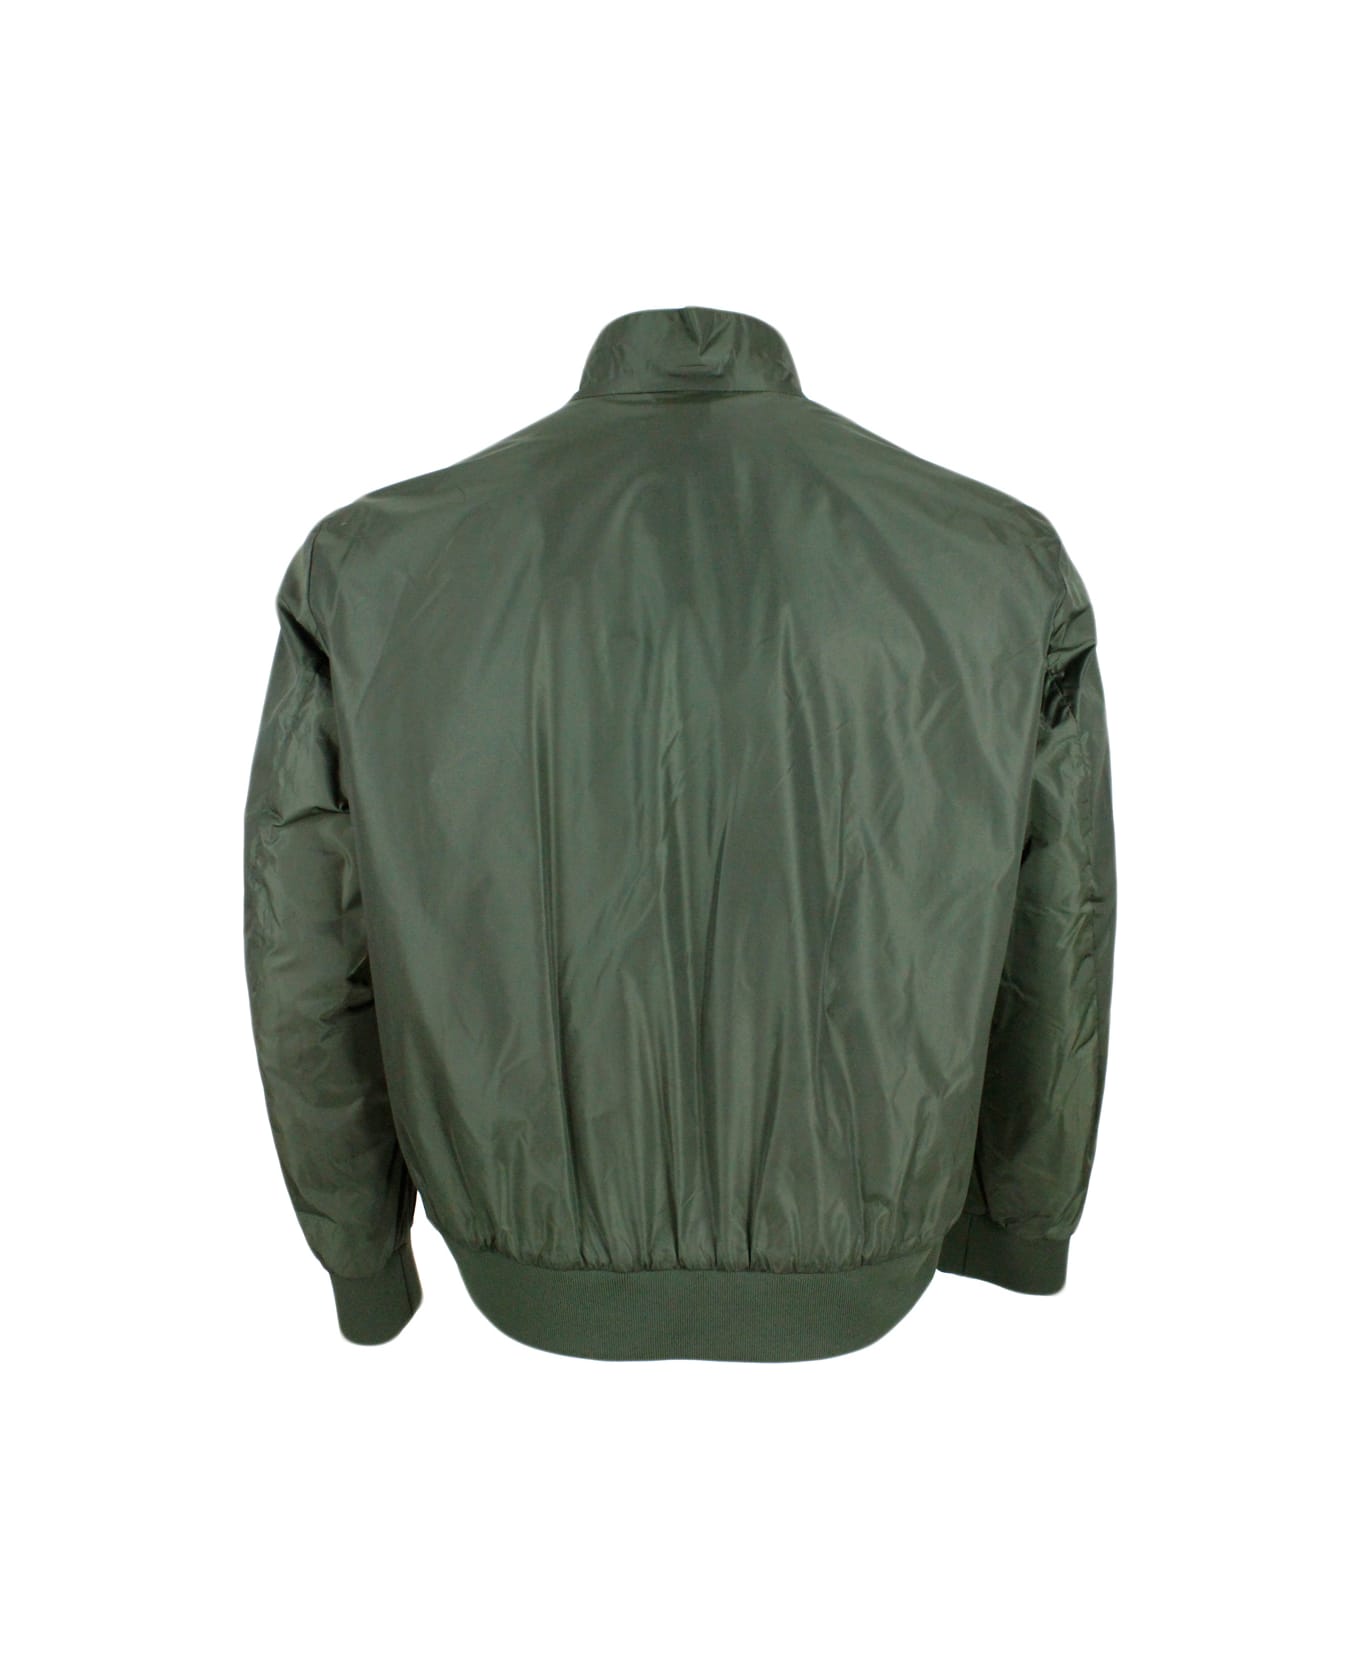 Add Water-repellent Nylon Bomber Jacket, Zip Closure And Pockets With Flap Closure - Green